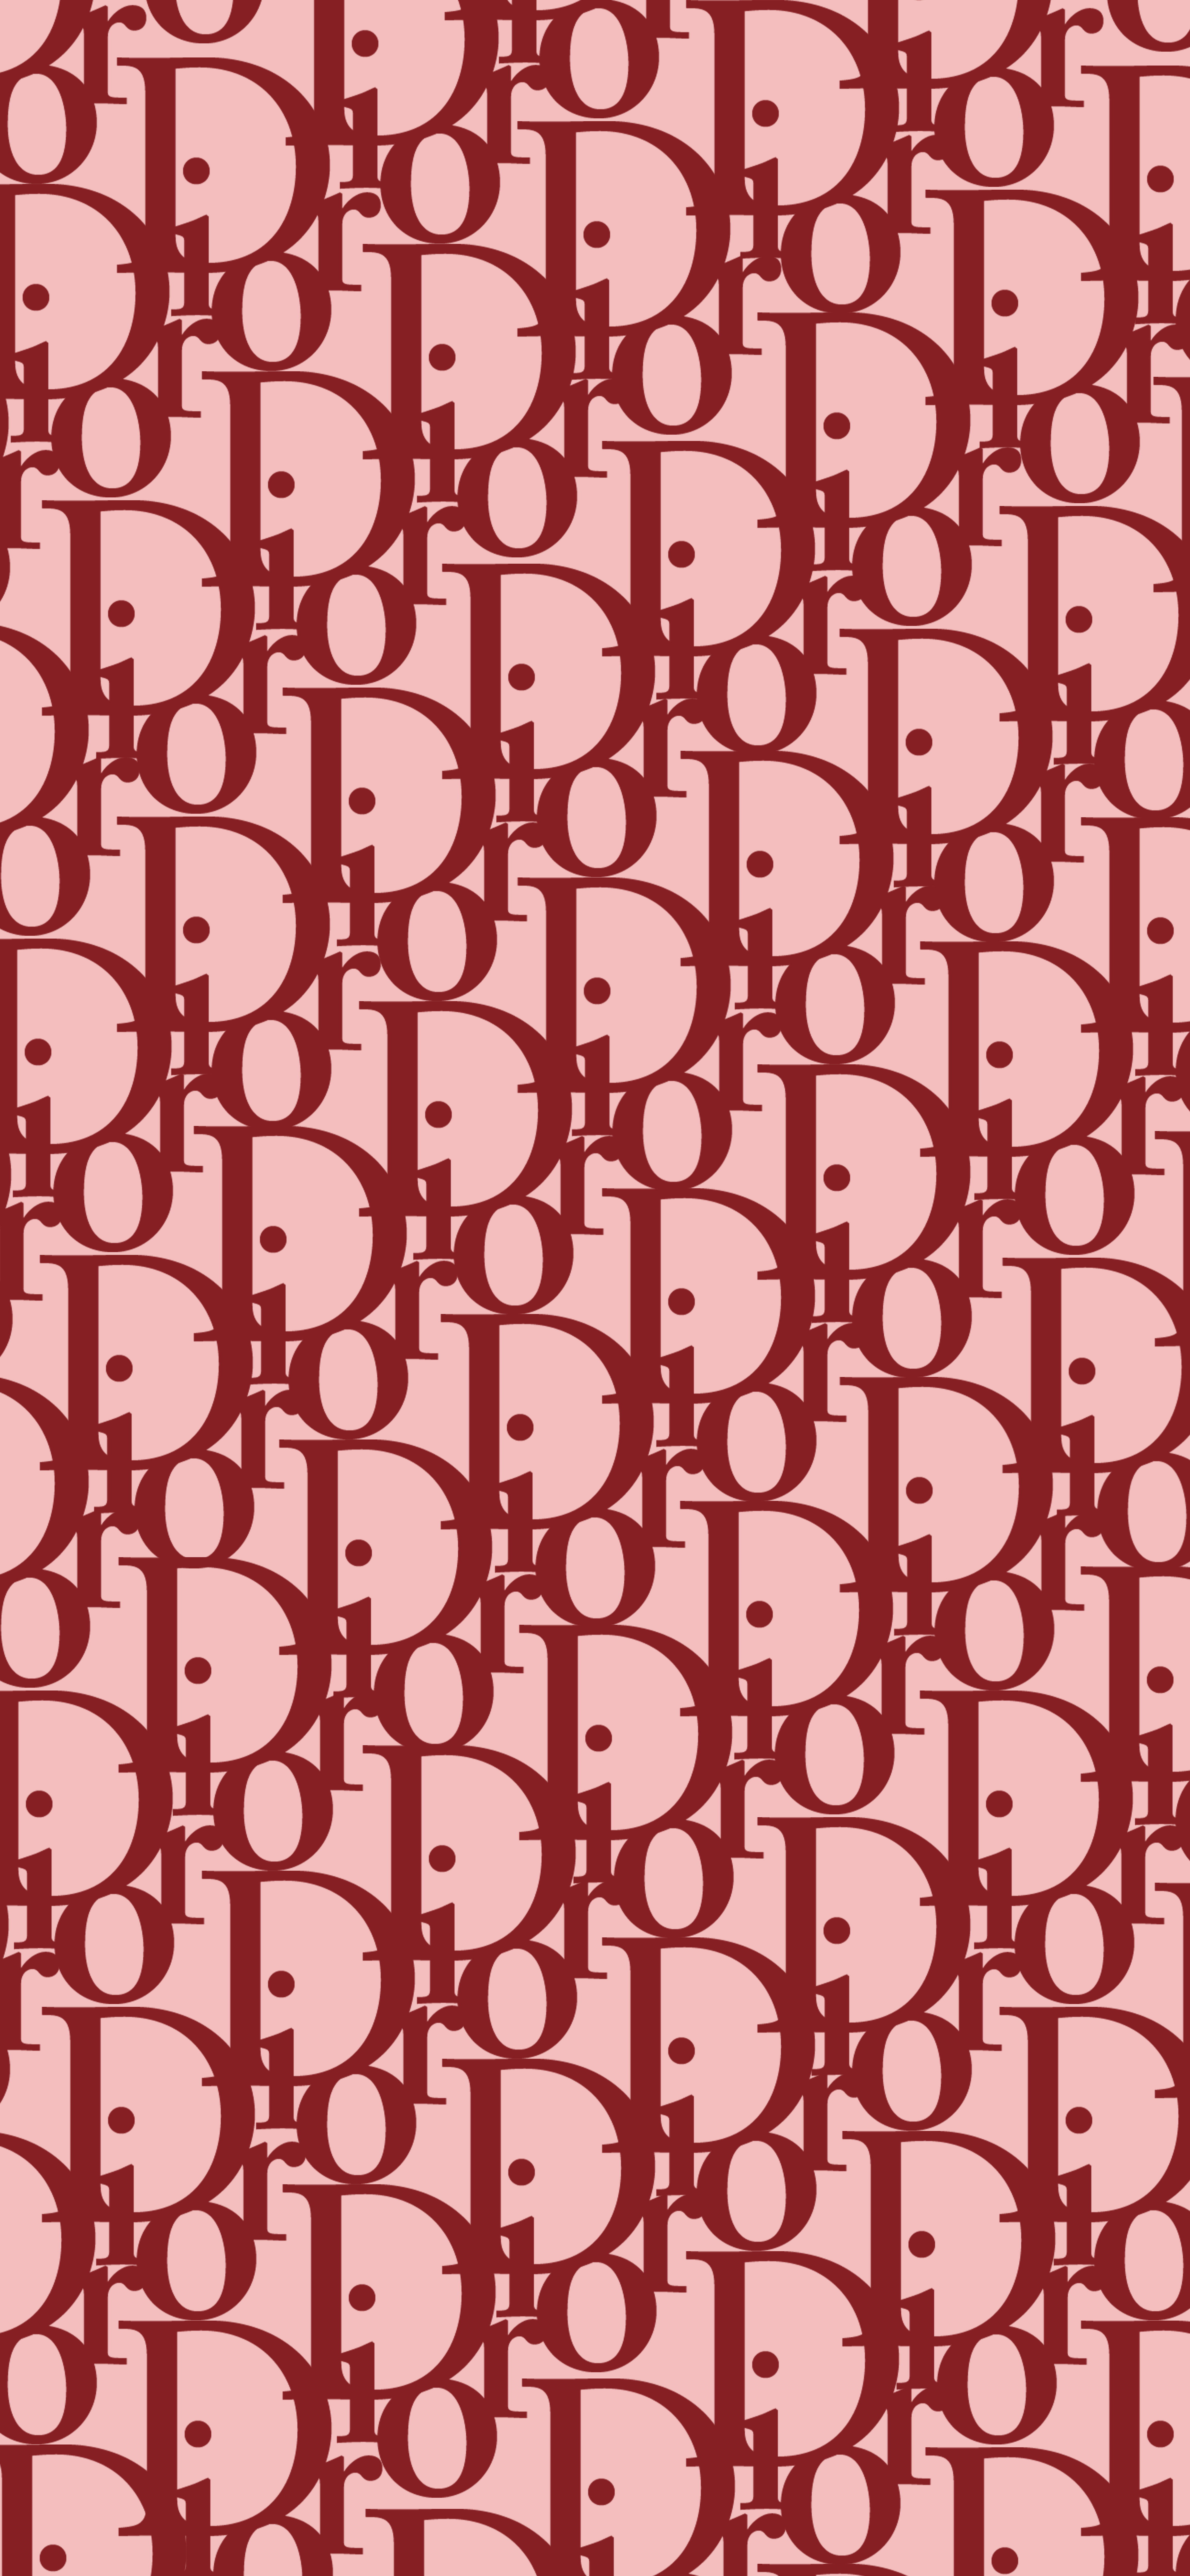 A repeating pattern of the letter D in red on a pink background. - Dior